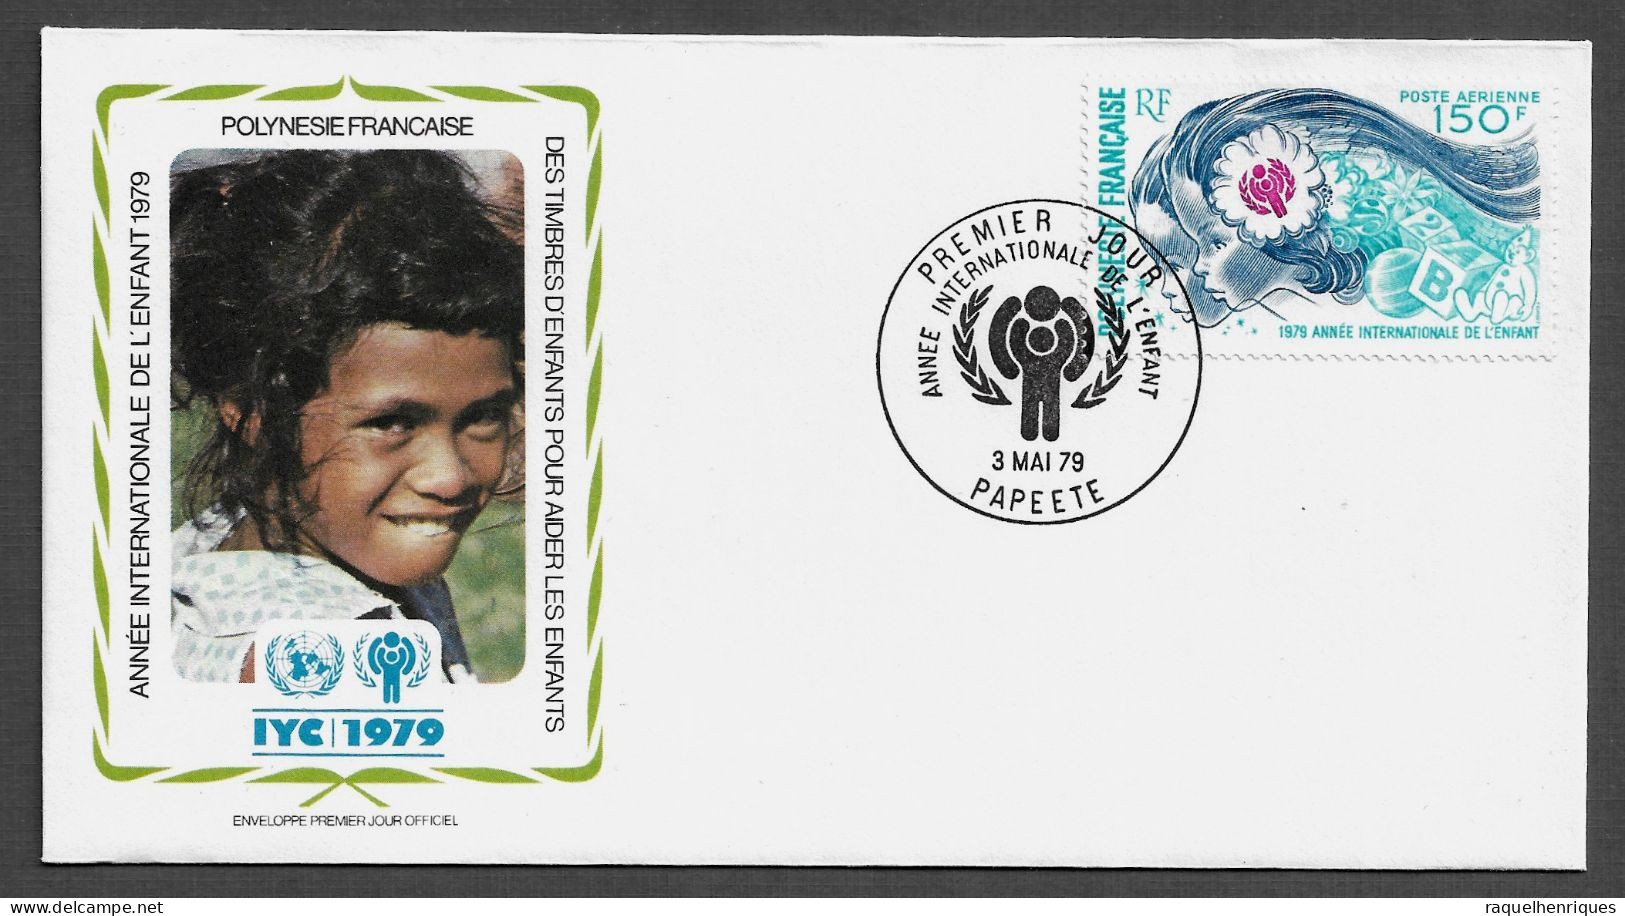 FRENCH POLYNESIA FDC COVER - 1979 International Year Of The Child SET FDC (FDC79#07) - Briefe U. Dokumente